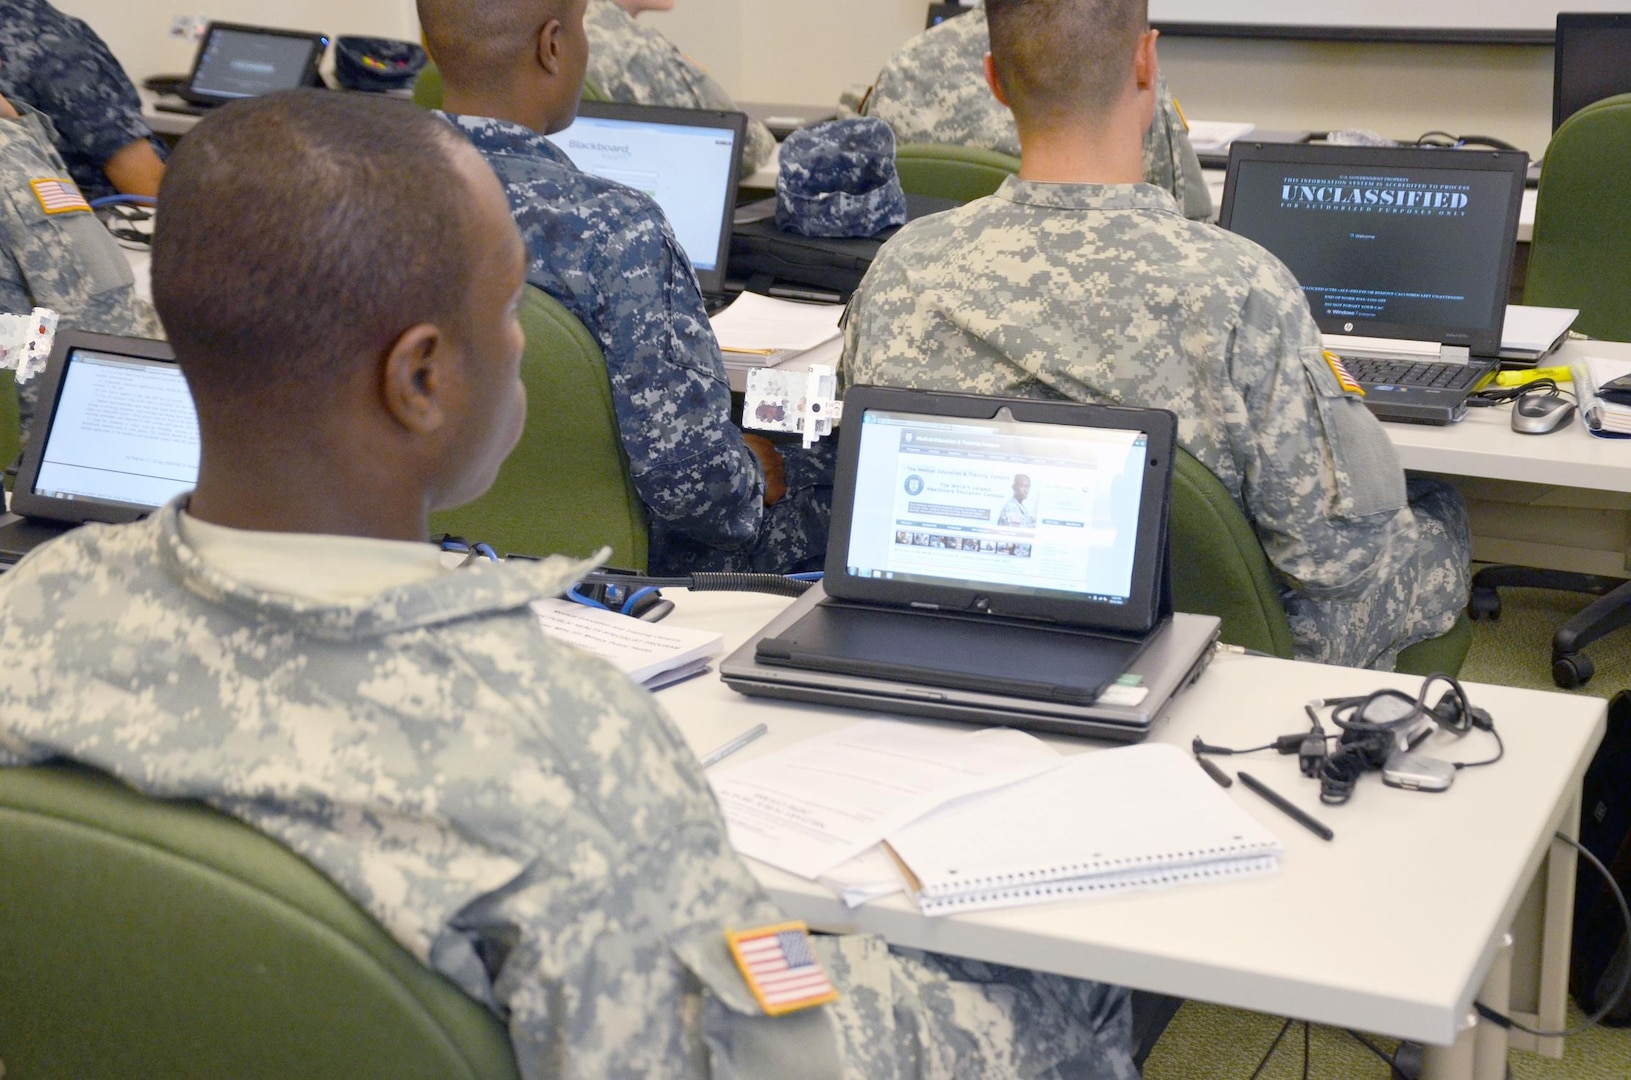 A student in the Public Health Specialist program, class 005-16, utilizes a Slate tablet in class as part of eMETC, a test pilot program. Two Public Health Specialist program classes were issued wireless laptops or Slates to test the feasibility of using mobile devices to enhance learning ability.